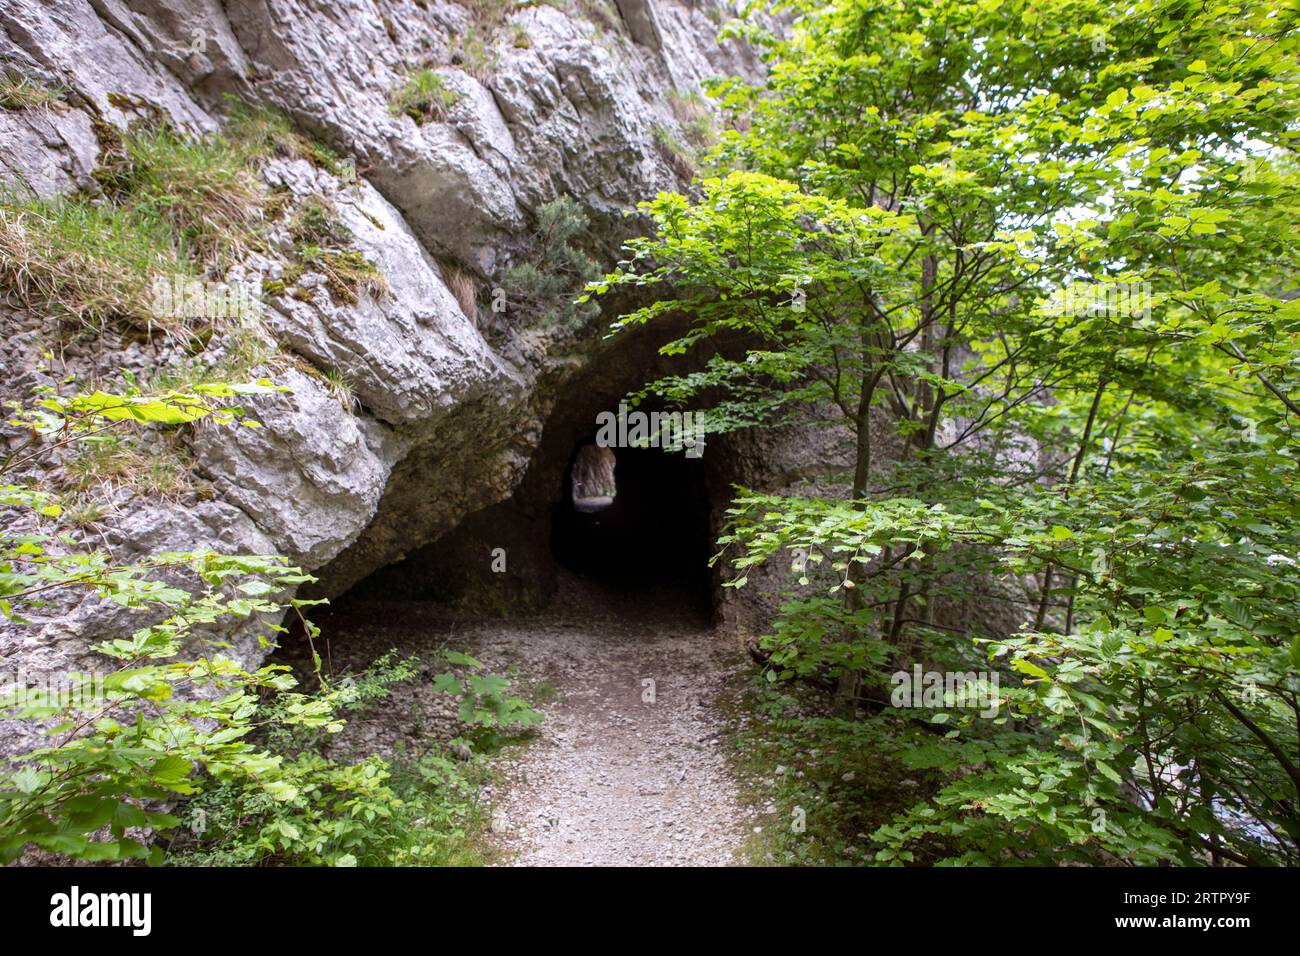 Rock wall with entrance to the tunnel cave in Jura mountains, hiking path trail, light at the end of tunnel. Green trees. Gorges de Court, Switzerland Stock Photo